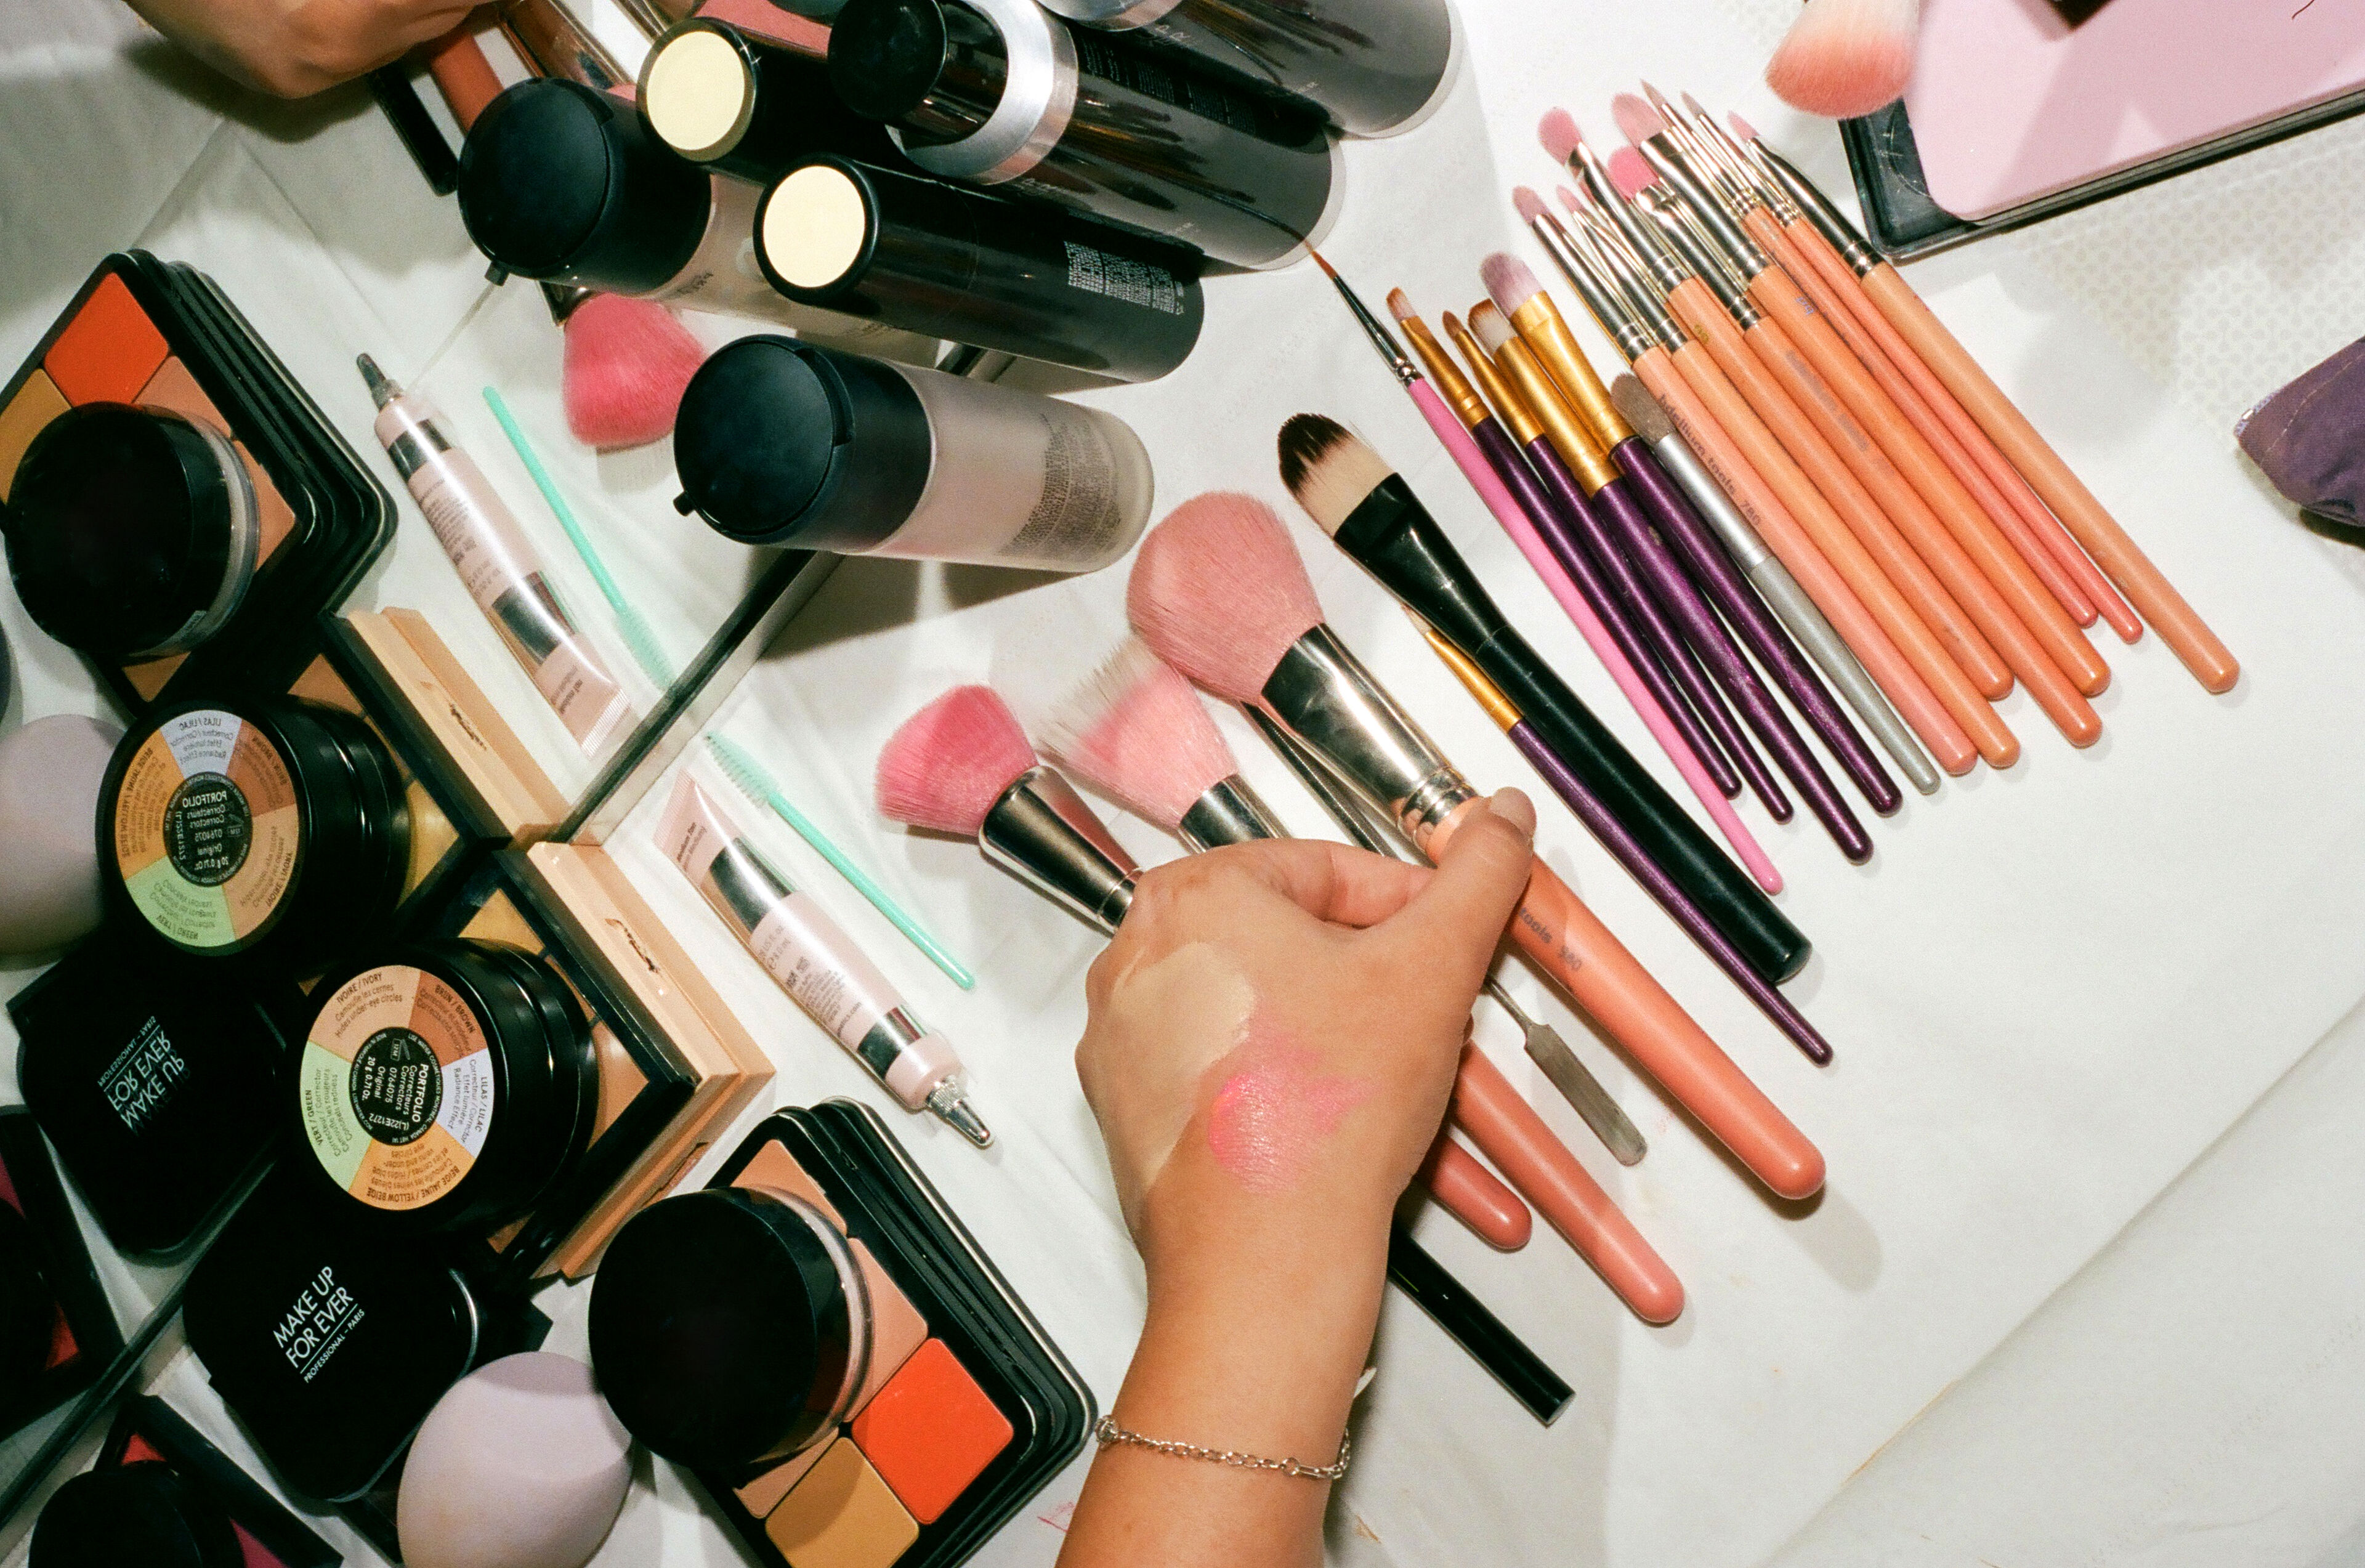 A person's hand with swatched makeup surrounded by various cosmetics and applicator brushes on a white surface.